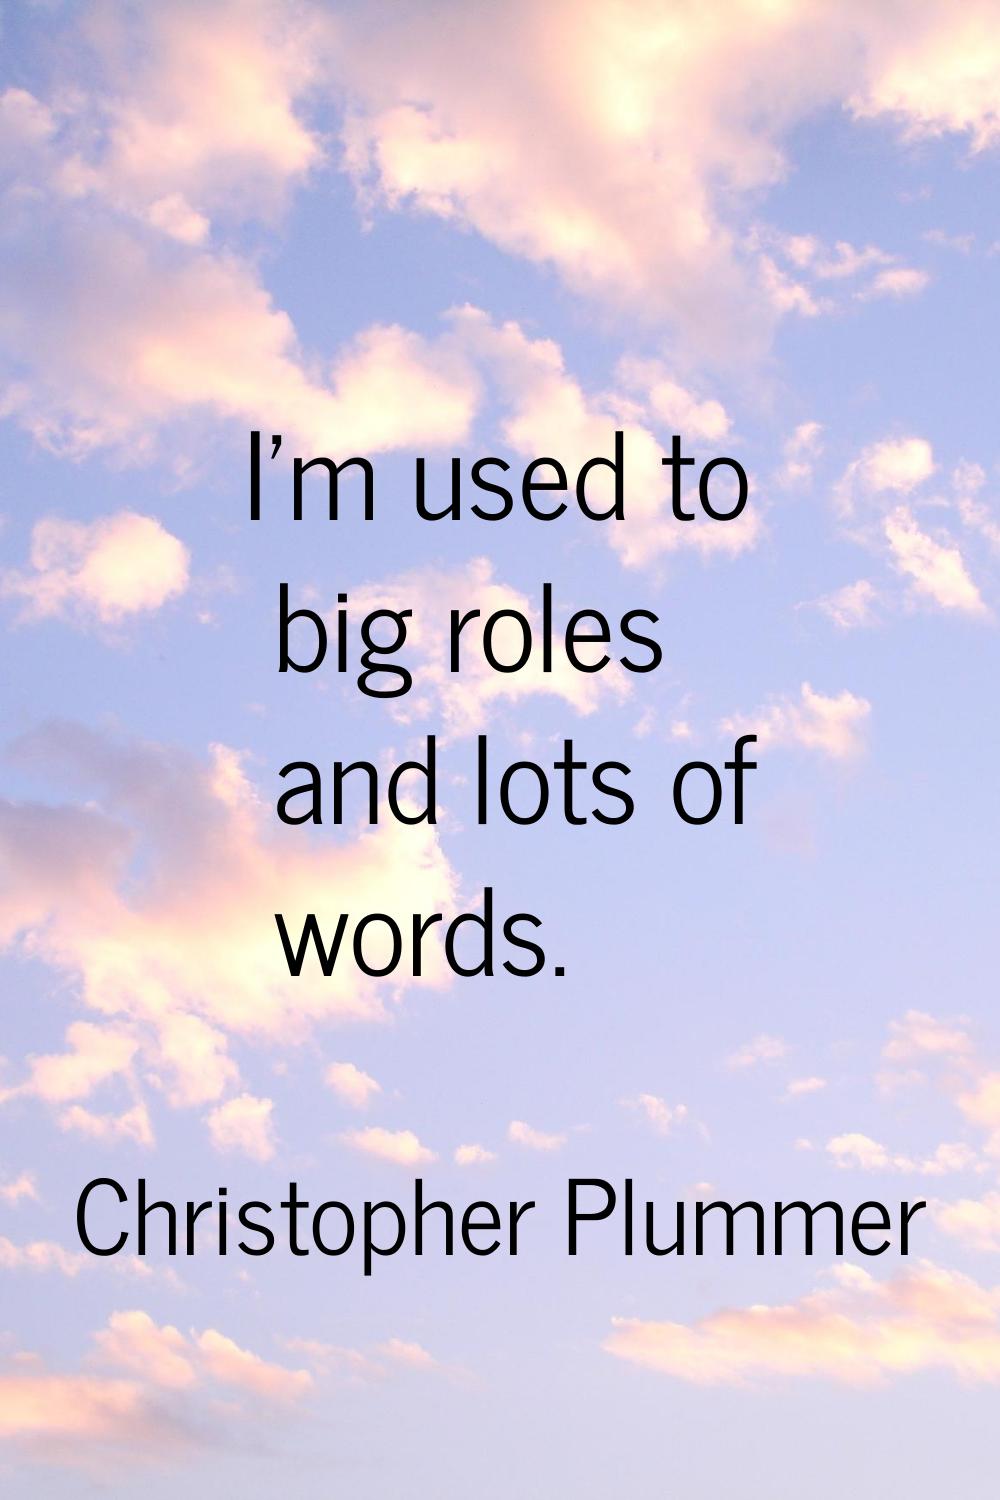 I'm used to big roles and lots of words.